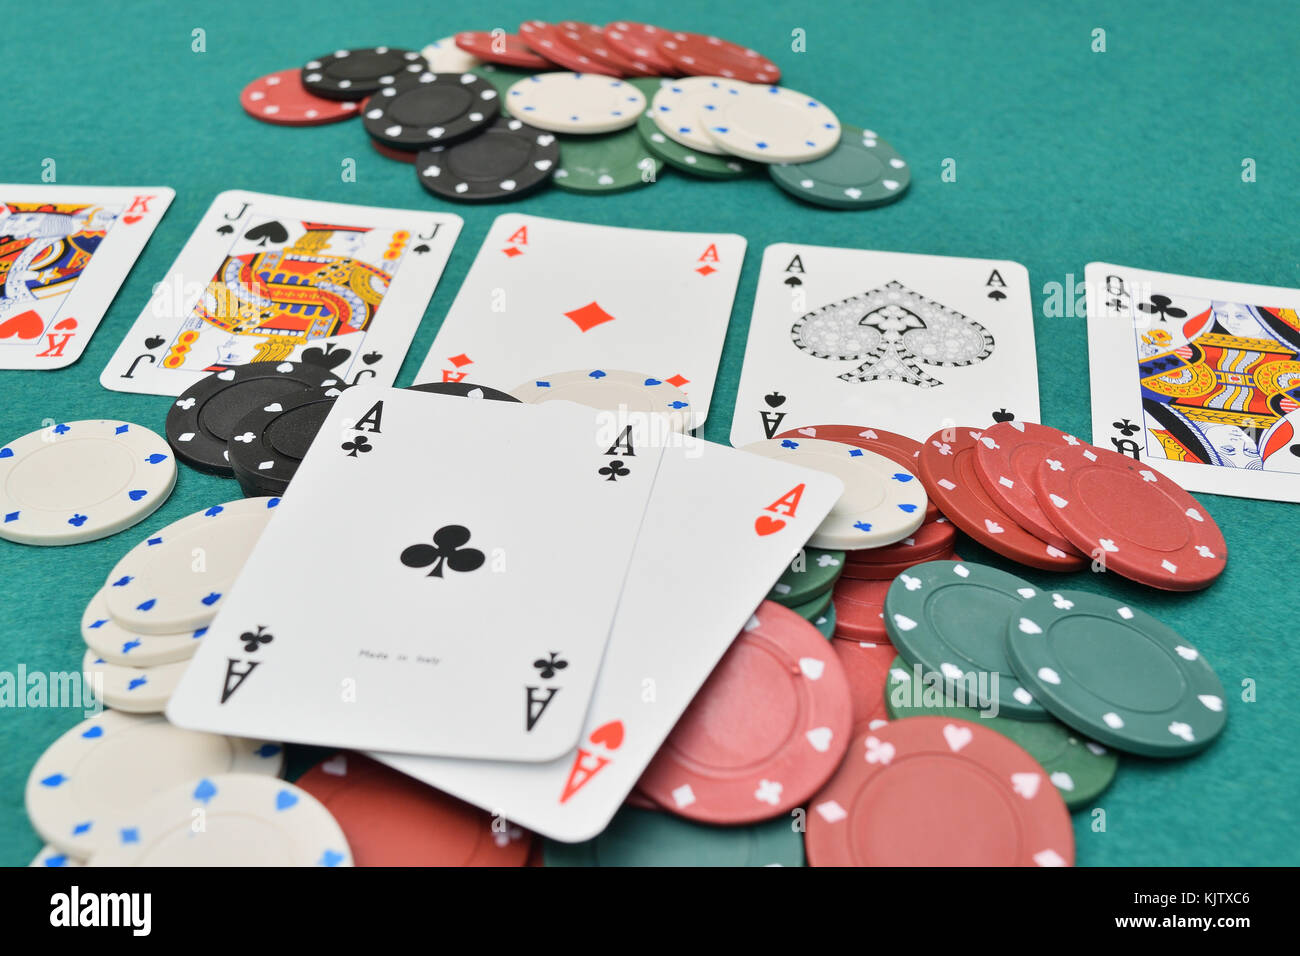 aces pair on a gambling table with chips Stock Photo